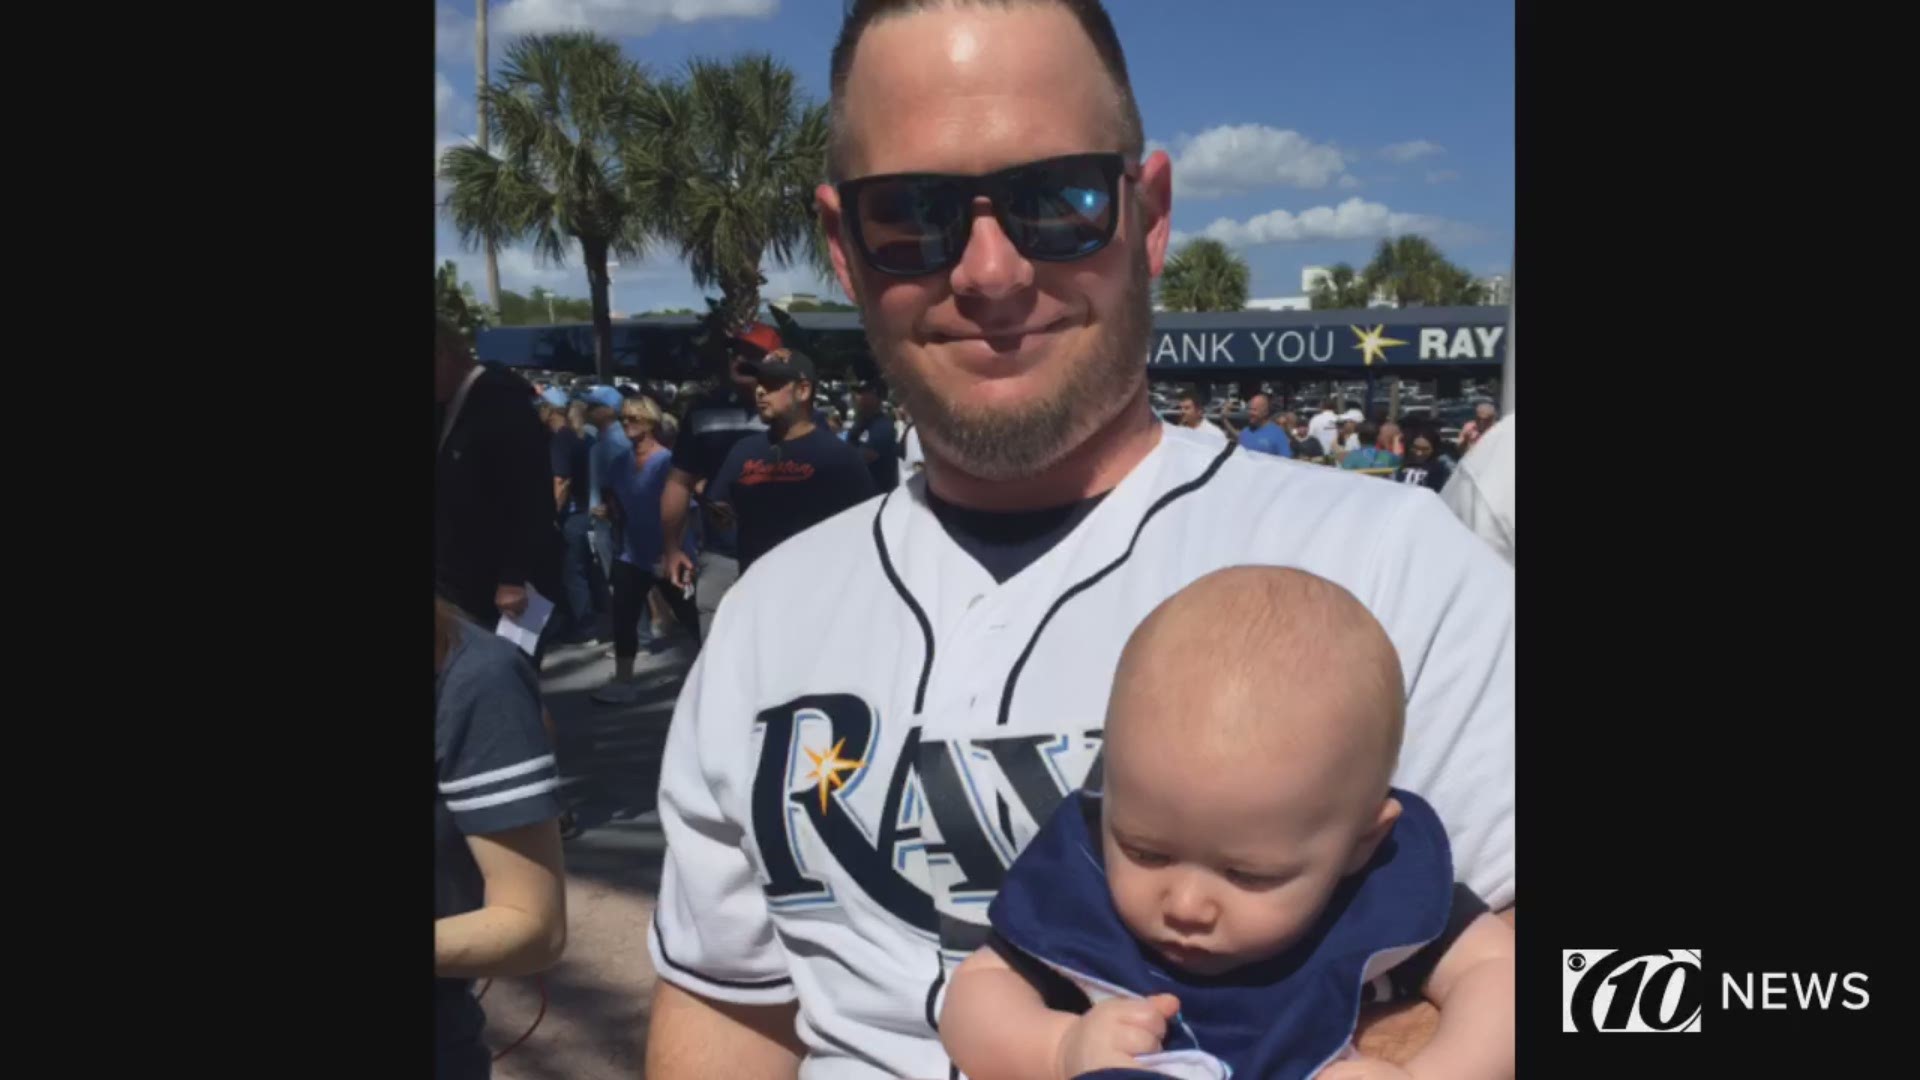 It's the first game of the 2019 regular season for the Tampa Bay Rays and the Houston Astros.